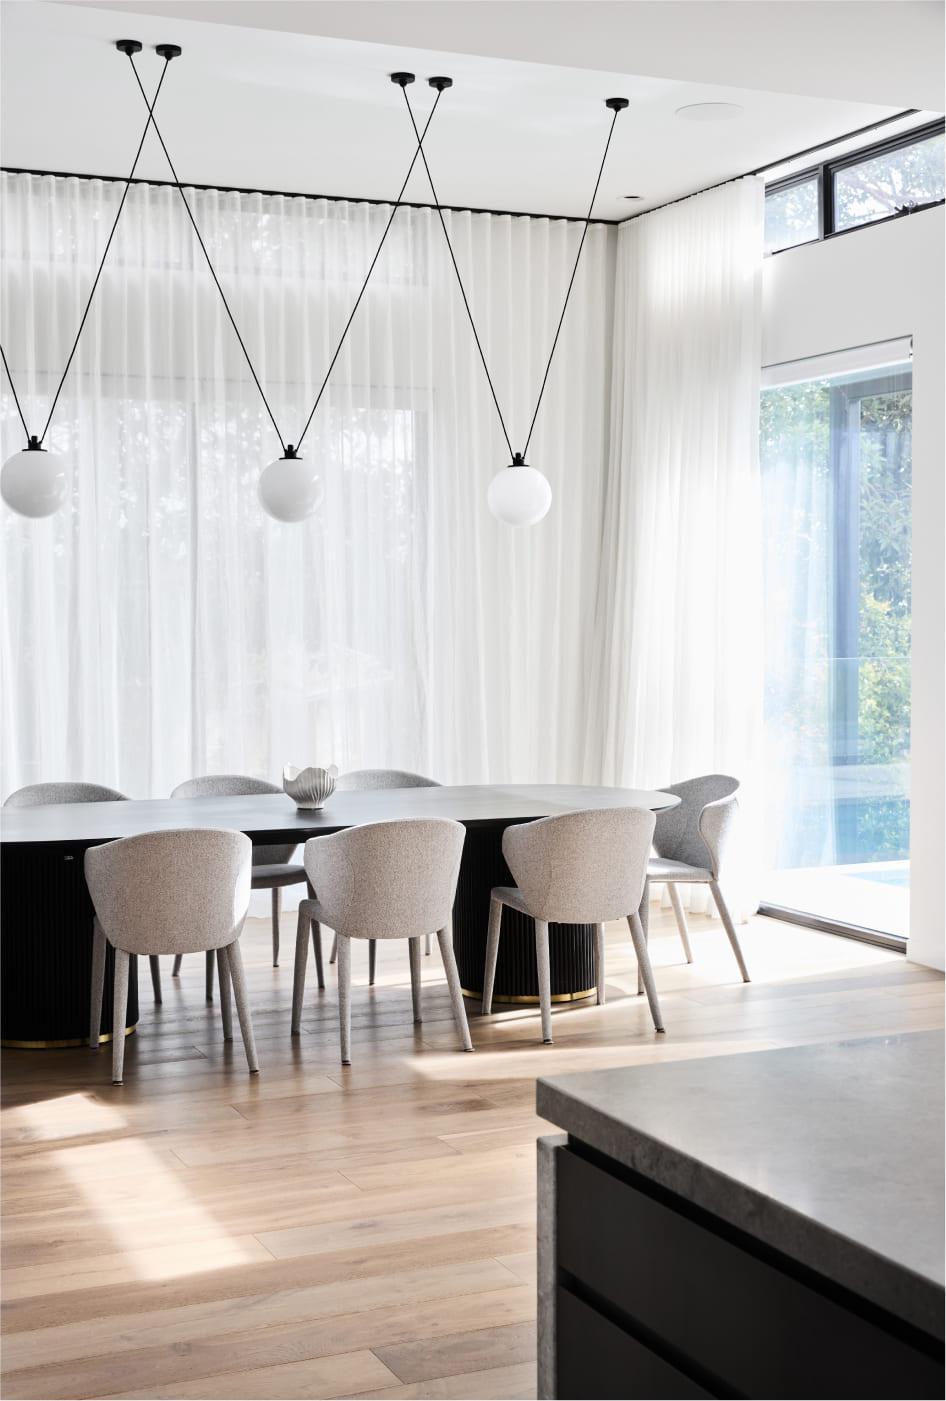 A large dining a space with feature pendants, floor to ceiling windows and sheers